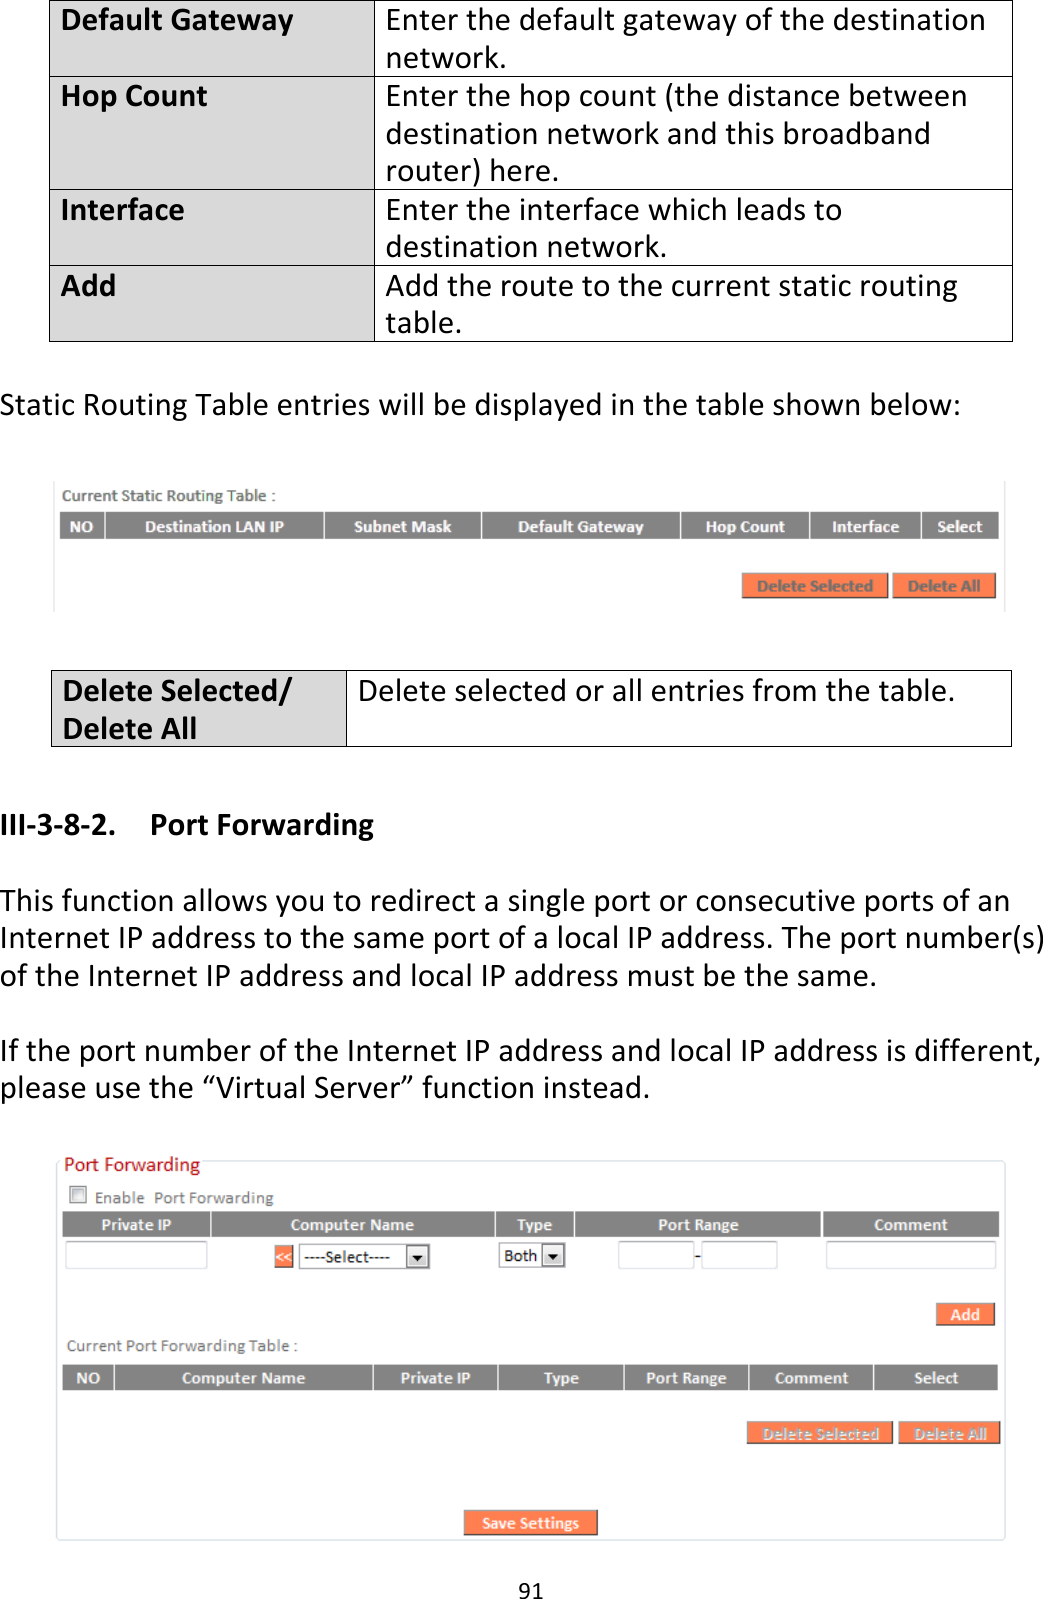 91 Default Gateway Enter the default gateway of the destination network. Hop Count Enter the hop count (the distance between destination network and this broadband router) here. Interface Enter the interface which leads to destination network. Add Add the route to the current static routing table.  Static Routing Table entries will be displayed in the table shown below:    Delete Selected/ Delete All Delete selected or all entries from the table.  III-3-8-2.  Port Forwarding  This function allows you to redirect a single port or consecutive ports of an Internet IP address to the same port of a local IP address. The port number(s) of the Internet IP address and local IP address must be the same.  If the port number of the Internet IP address and local IP address is different, please use the “Virtual Server” function instead.   